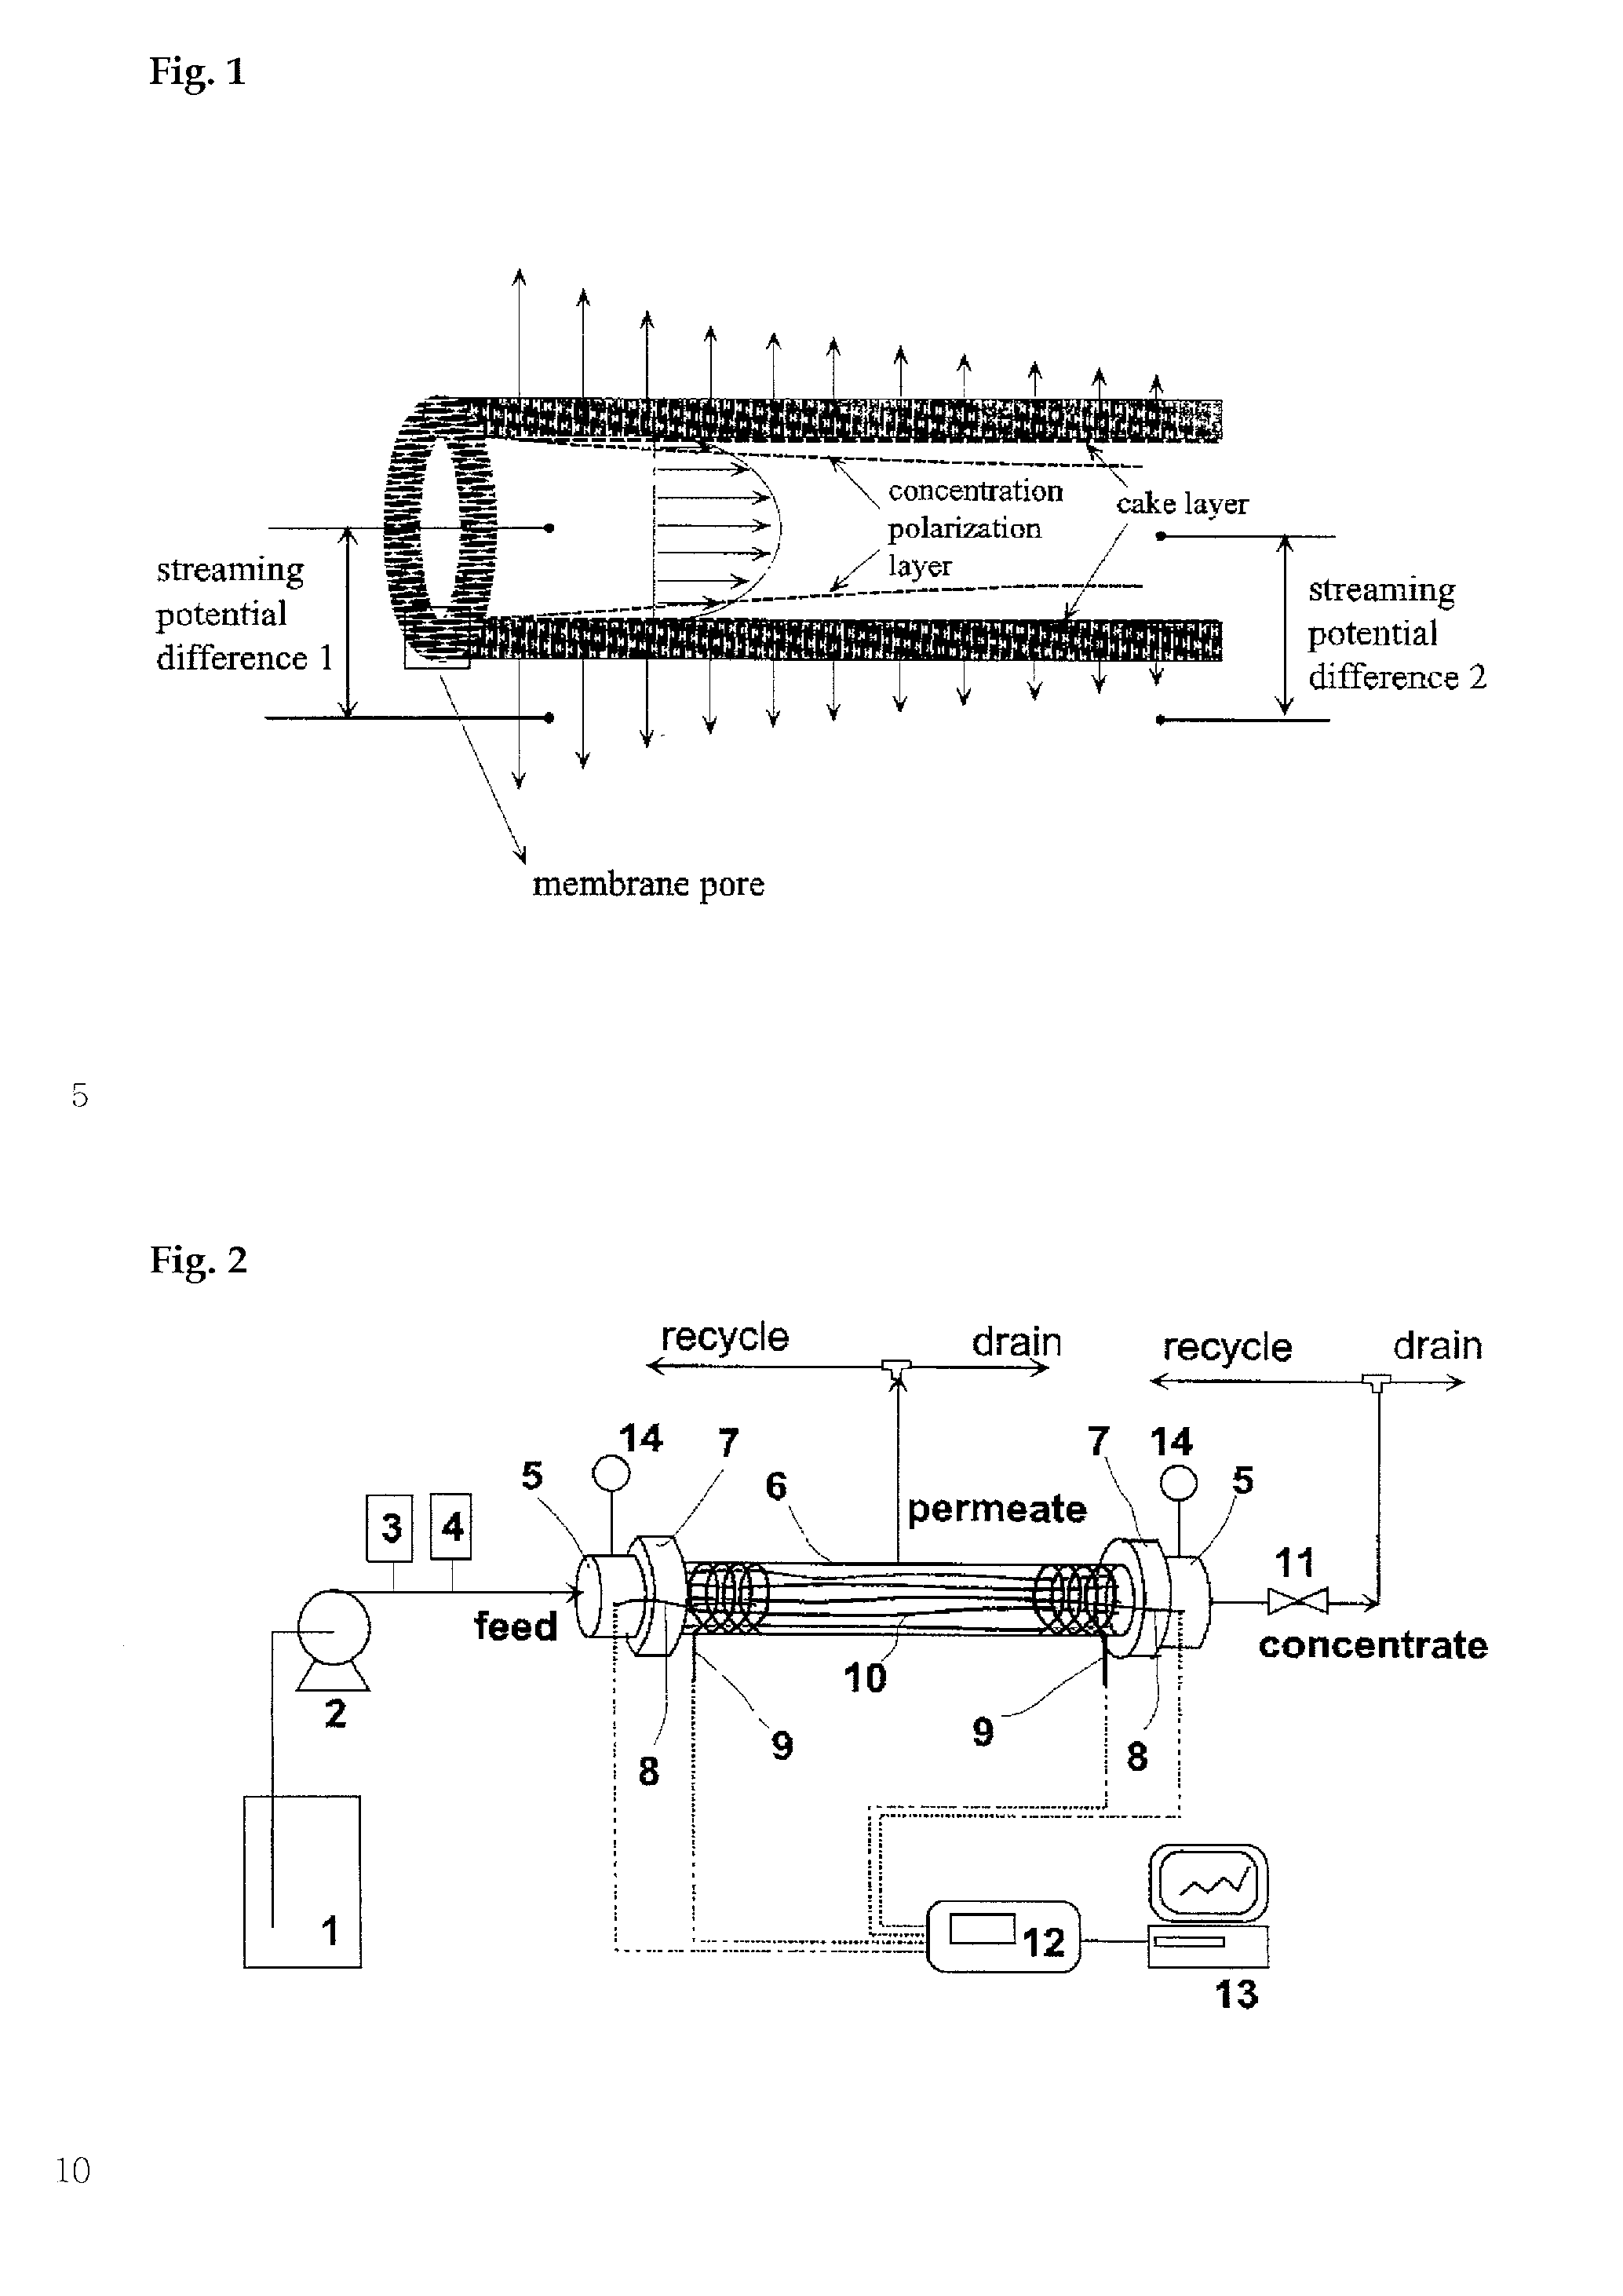 Equipment and method of local streaming potential measurement for monitoring the process of membrane fouling in hollow-fiber membrane filtrations